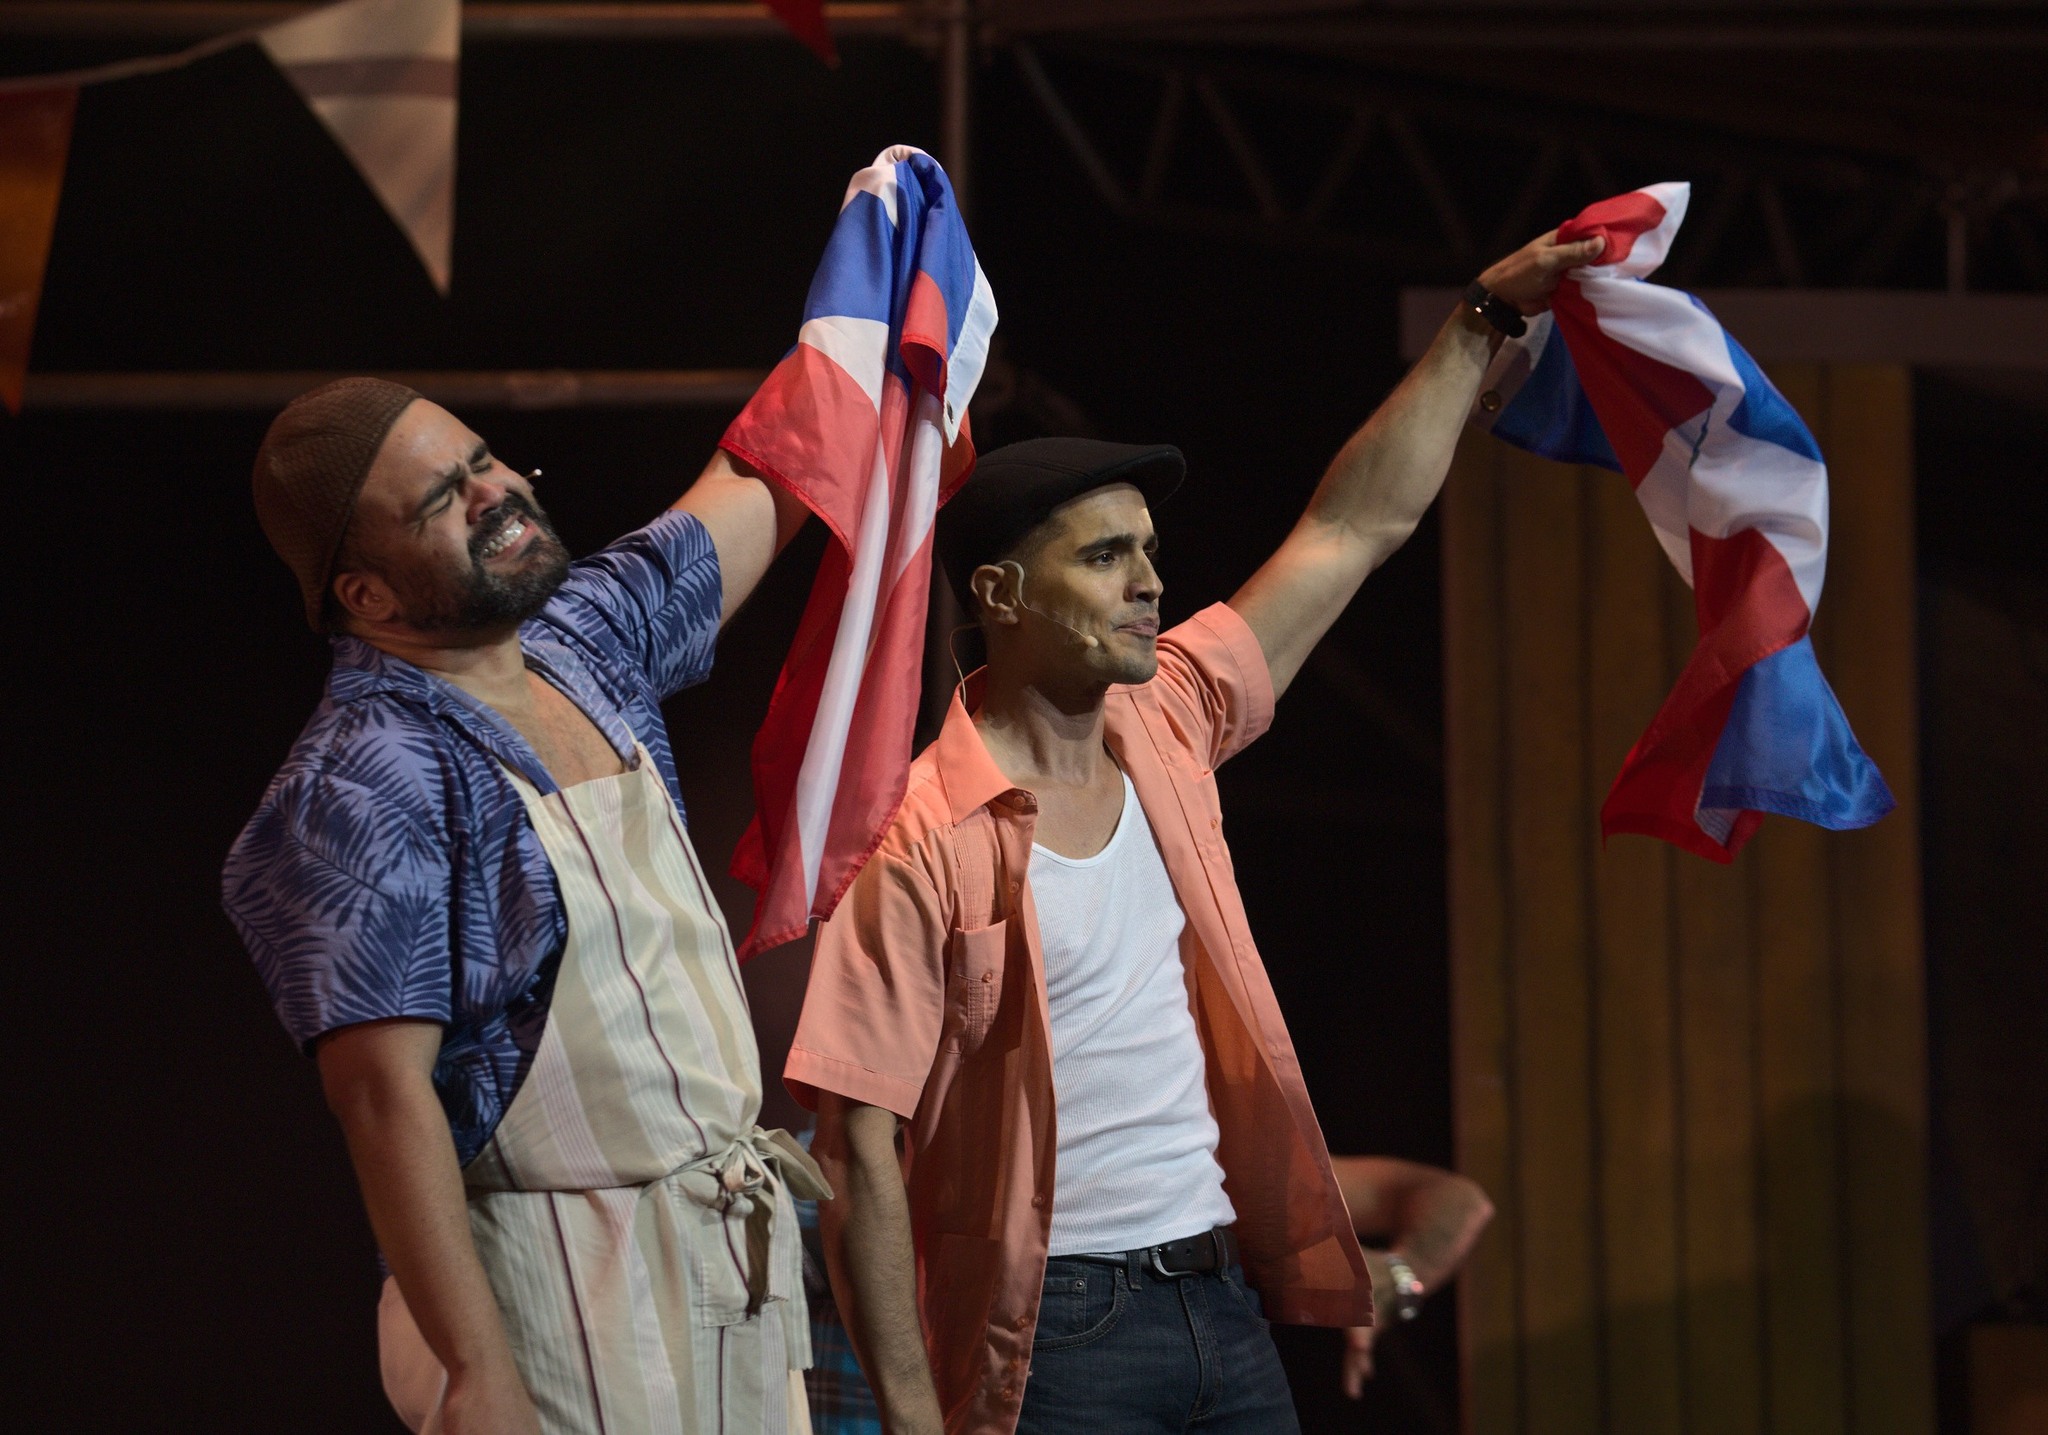 Cancelan funciones del musical “In The Heights”